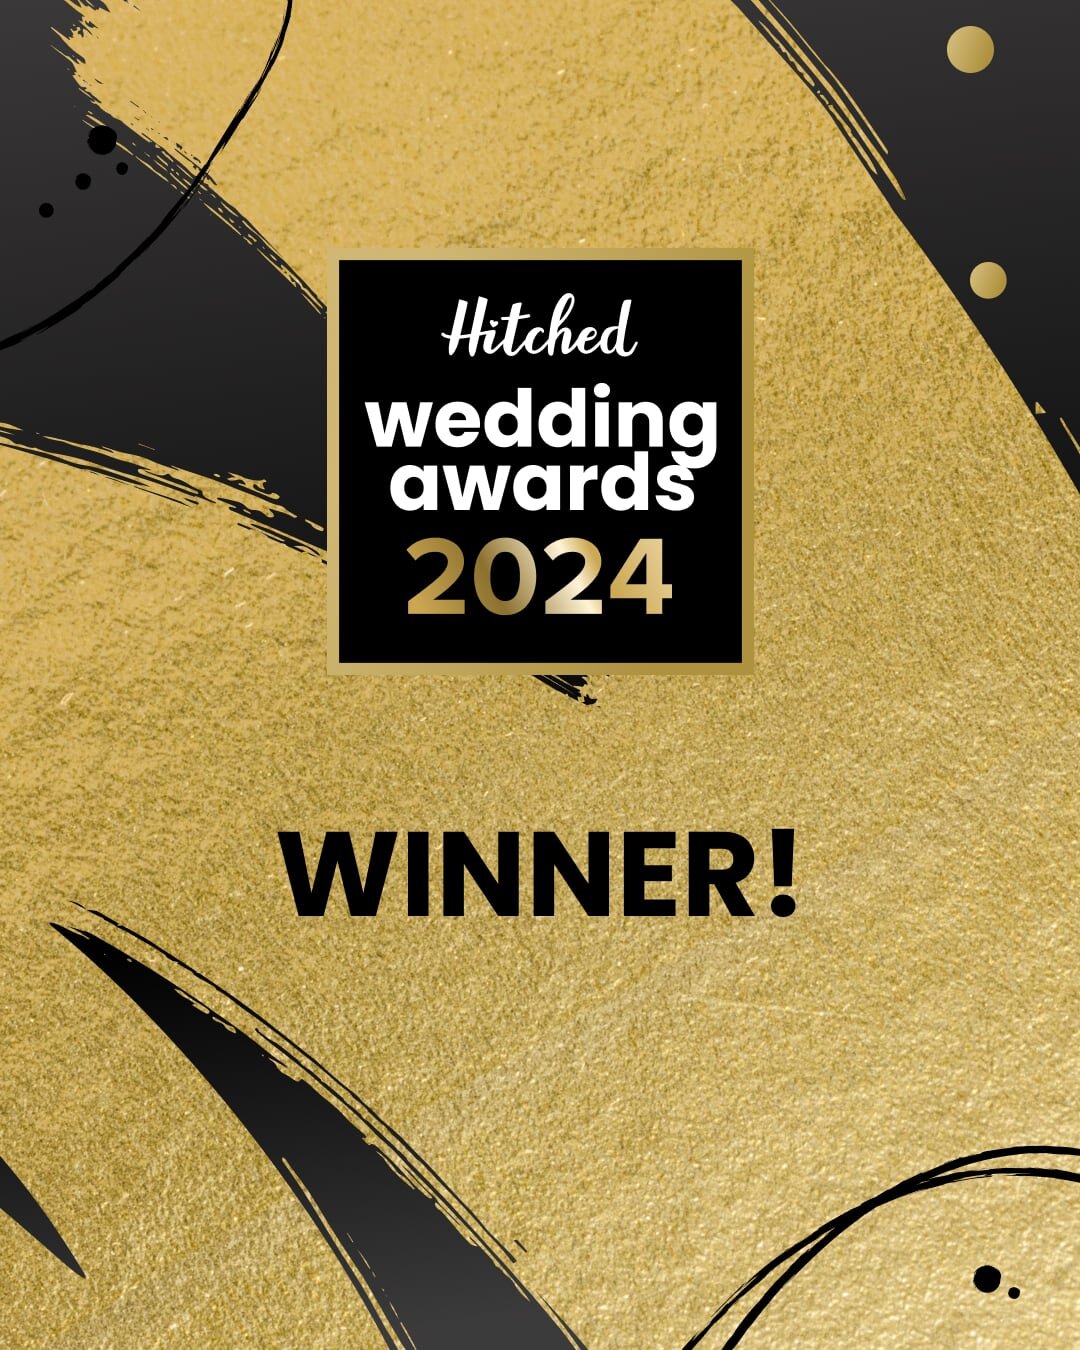 I am thrilled to announce that Squire &amp; Squire Photography has been honoured as a winner in the Wedding Photographers category at the Hitched Wedding Awards 2024. This recognition further establishes us as one of the most recommended professional